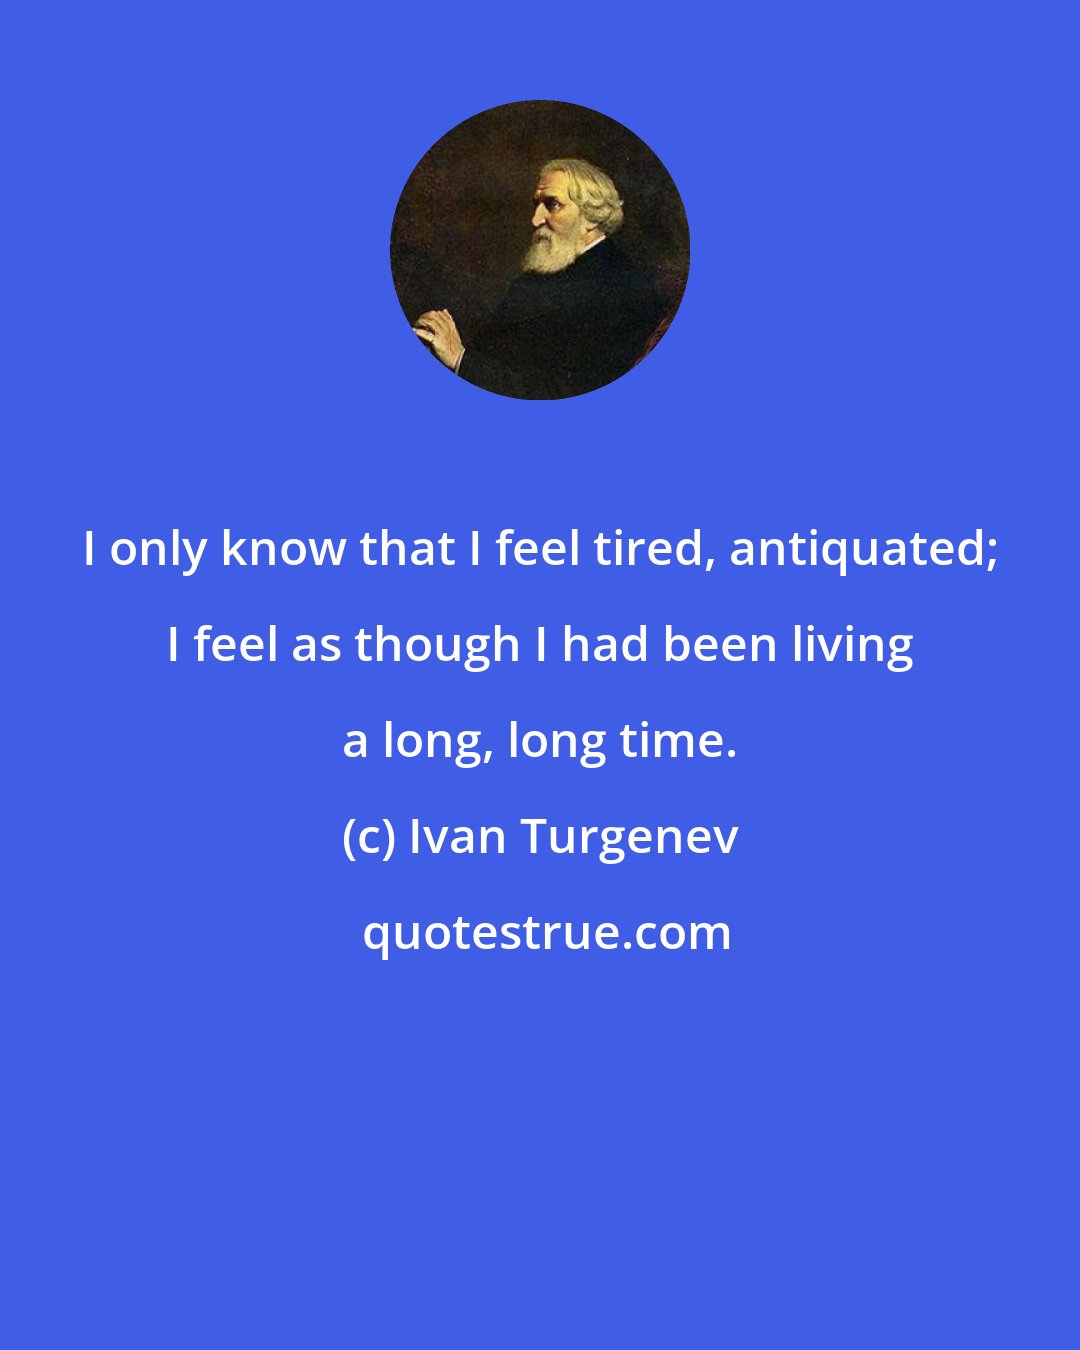 Ivan Turgenev: I only know that I feel tired, antiquated; I feel as though I had been living a long, long time.